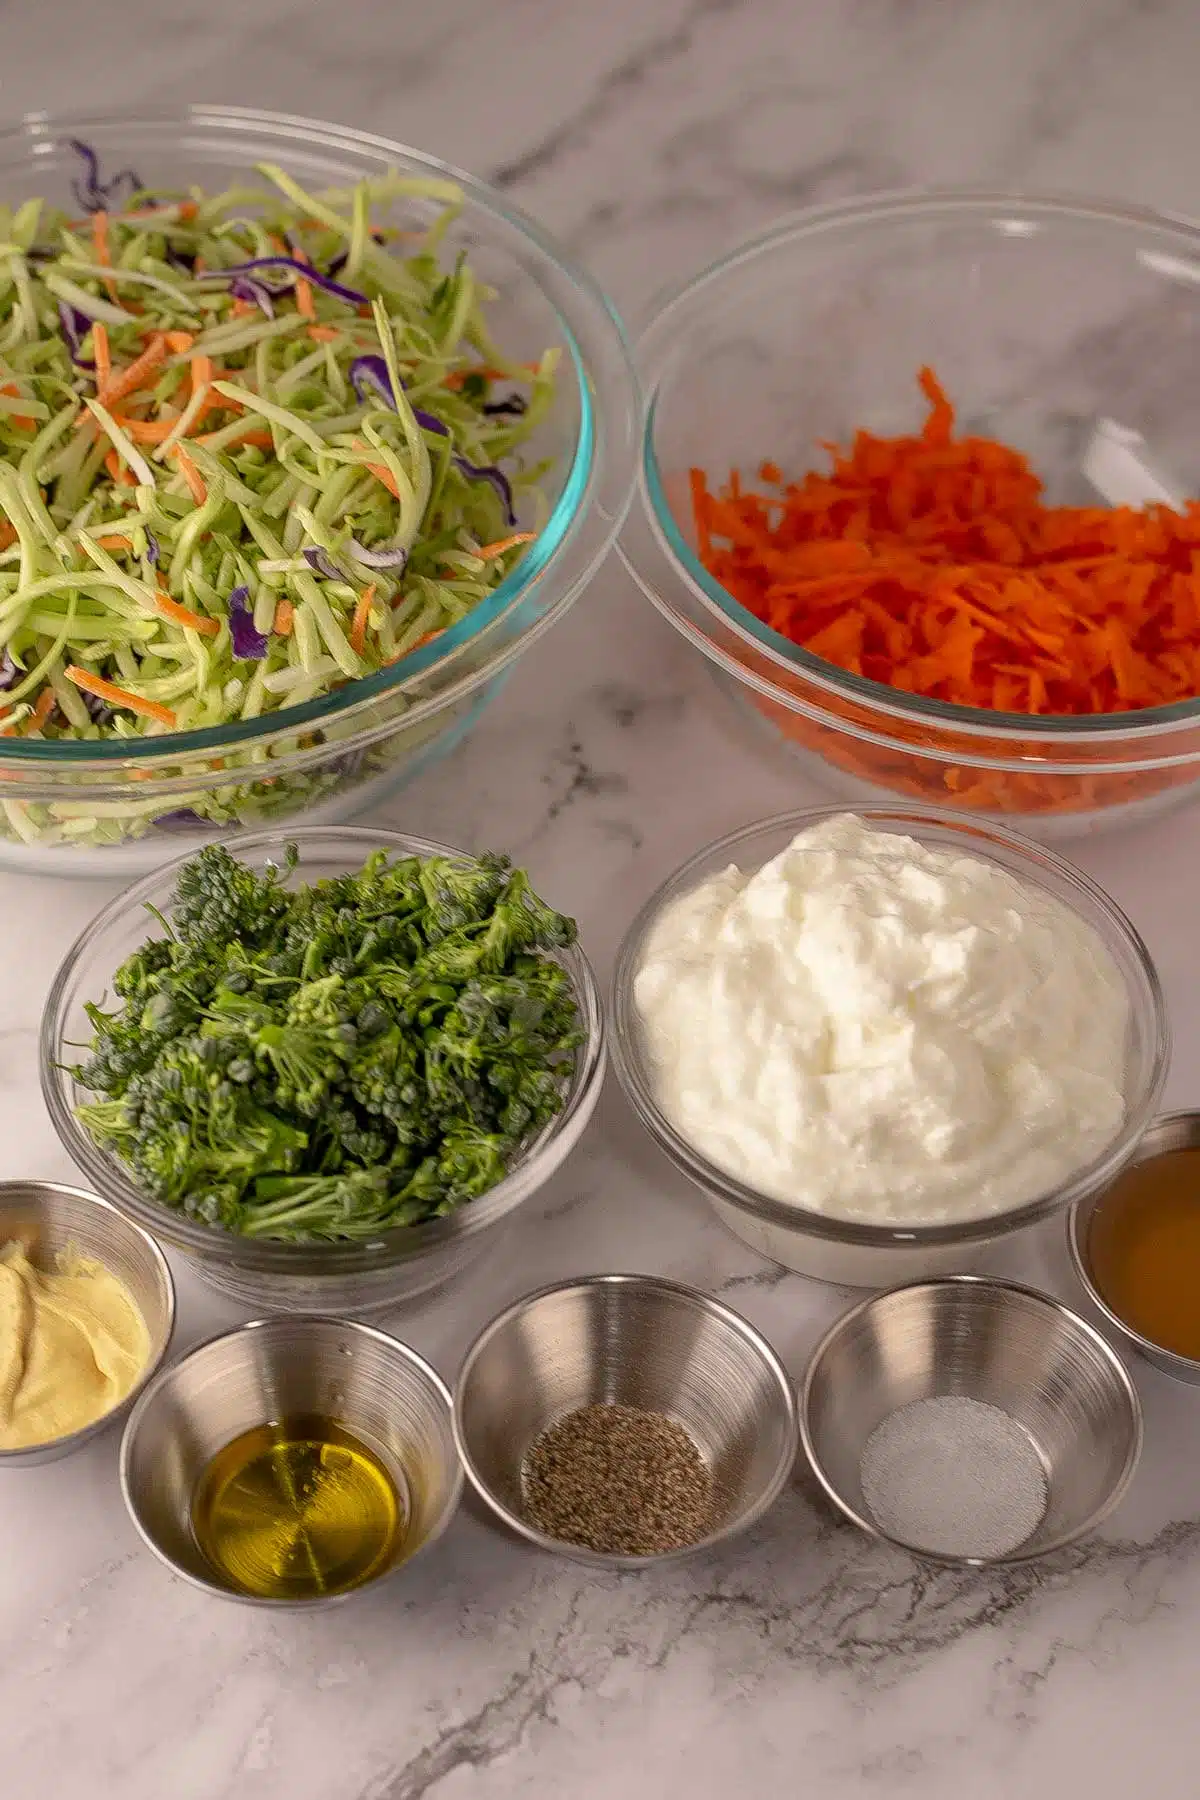 Tall image showing broccolini slaw ingredients.